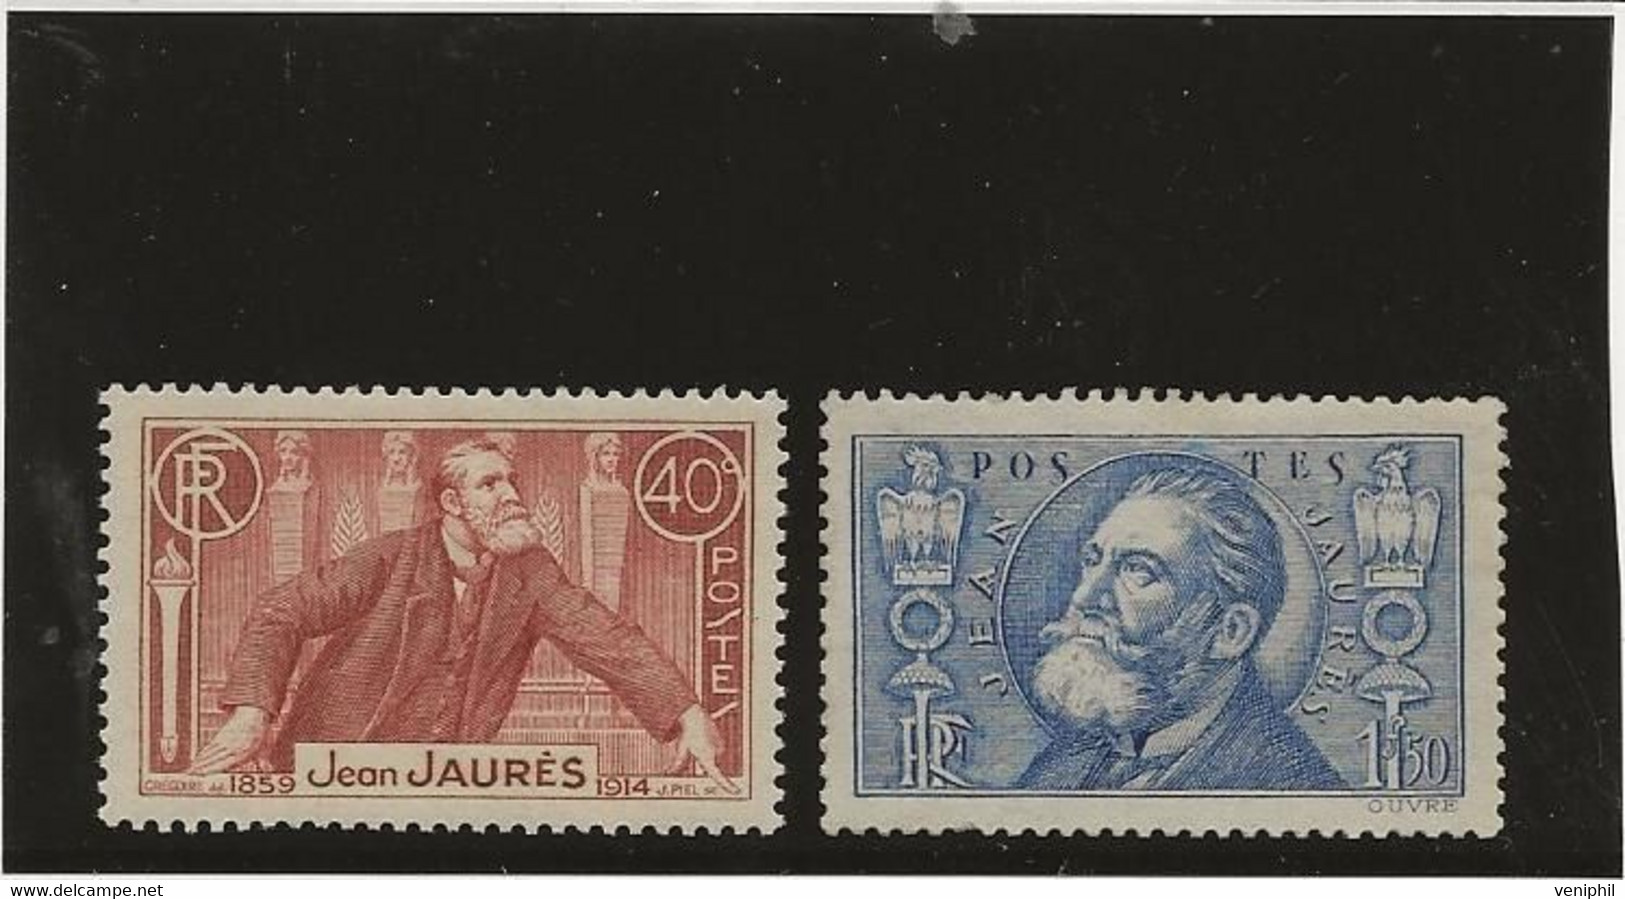 TIMBRES N° 318 Et 319  NEUF SANS CHARNIERE - ANNEE  1936 - COTE : 50 € - Nuovi